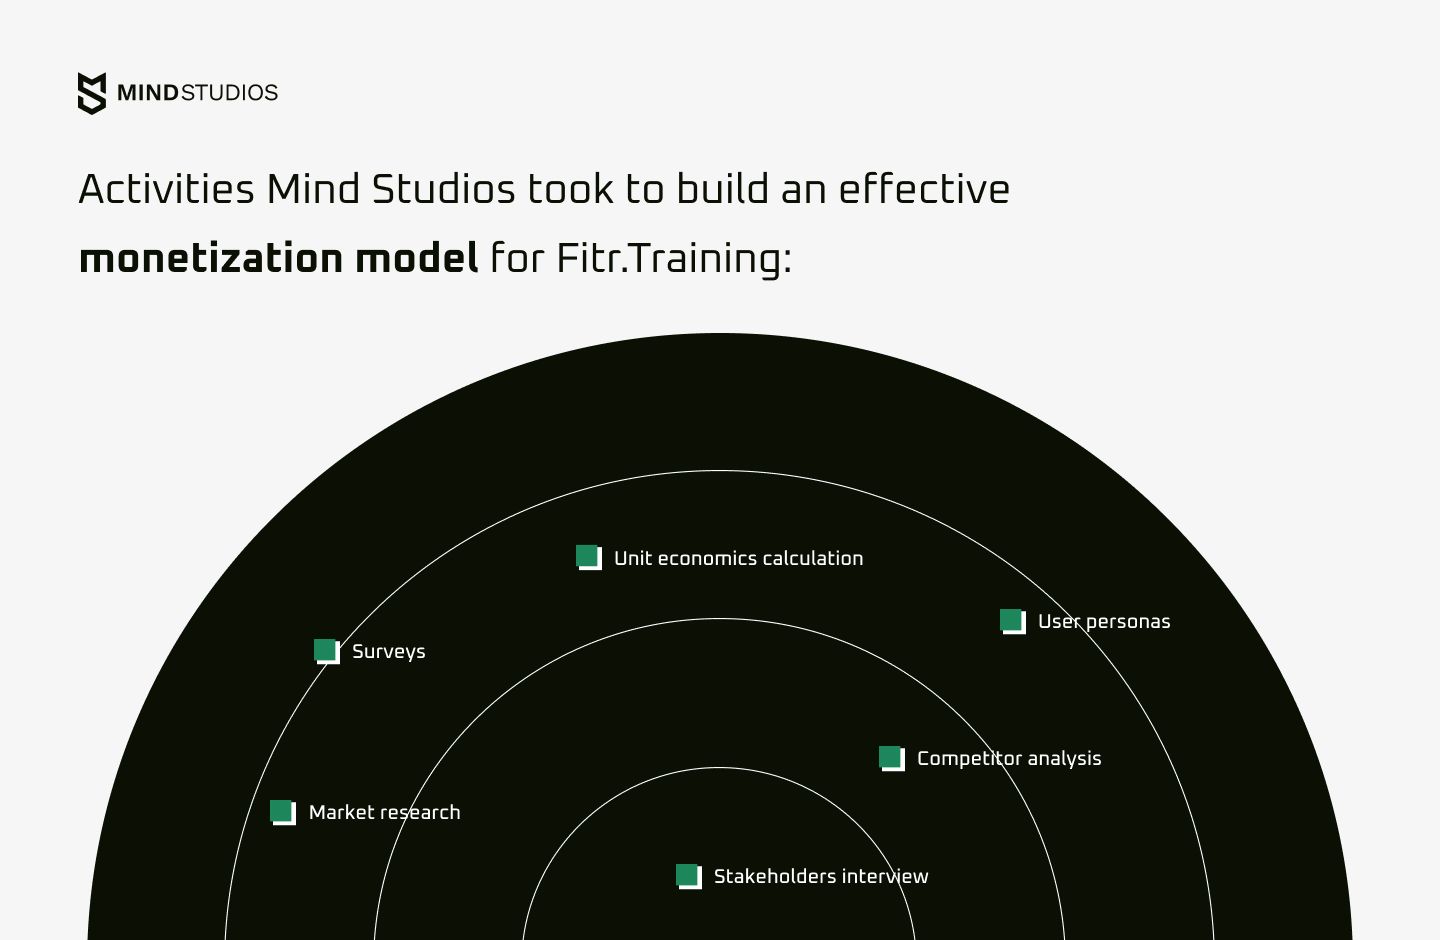 Activities Mind Studios took to build an effective monetization model for Fitr.Training